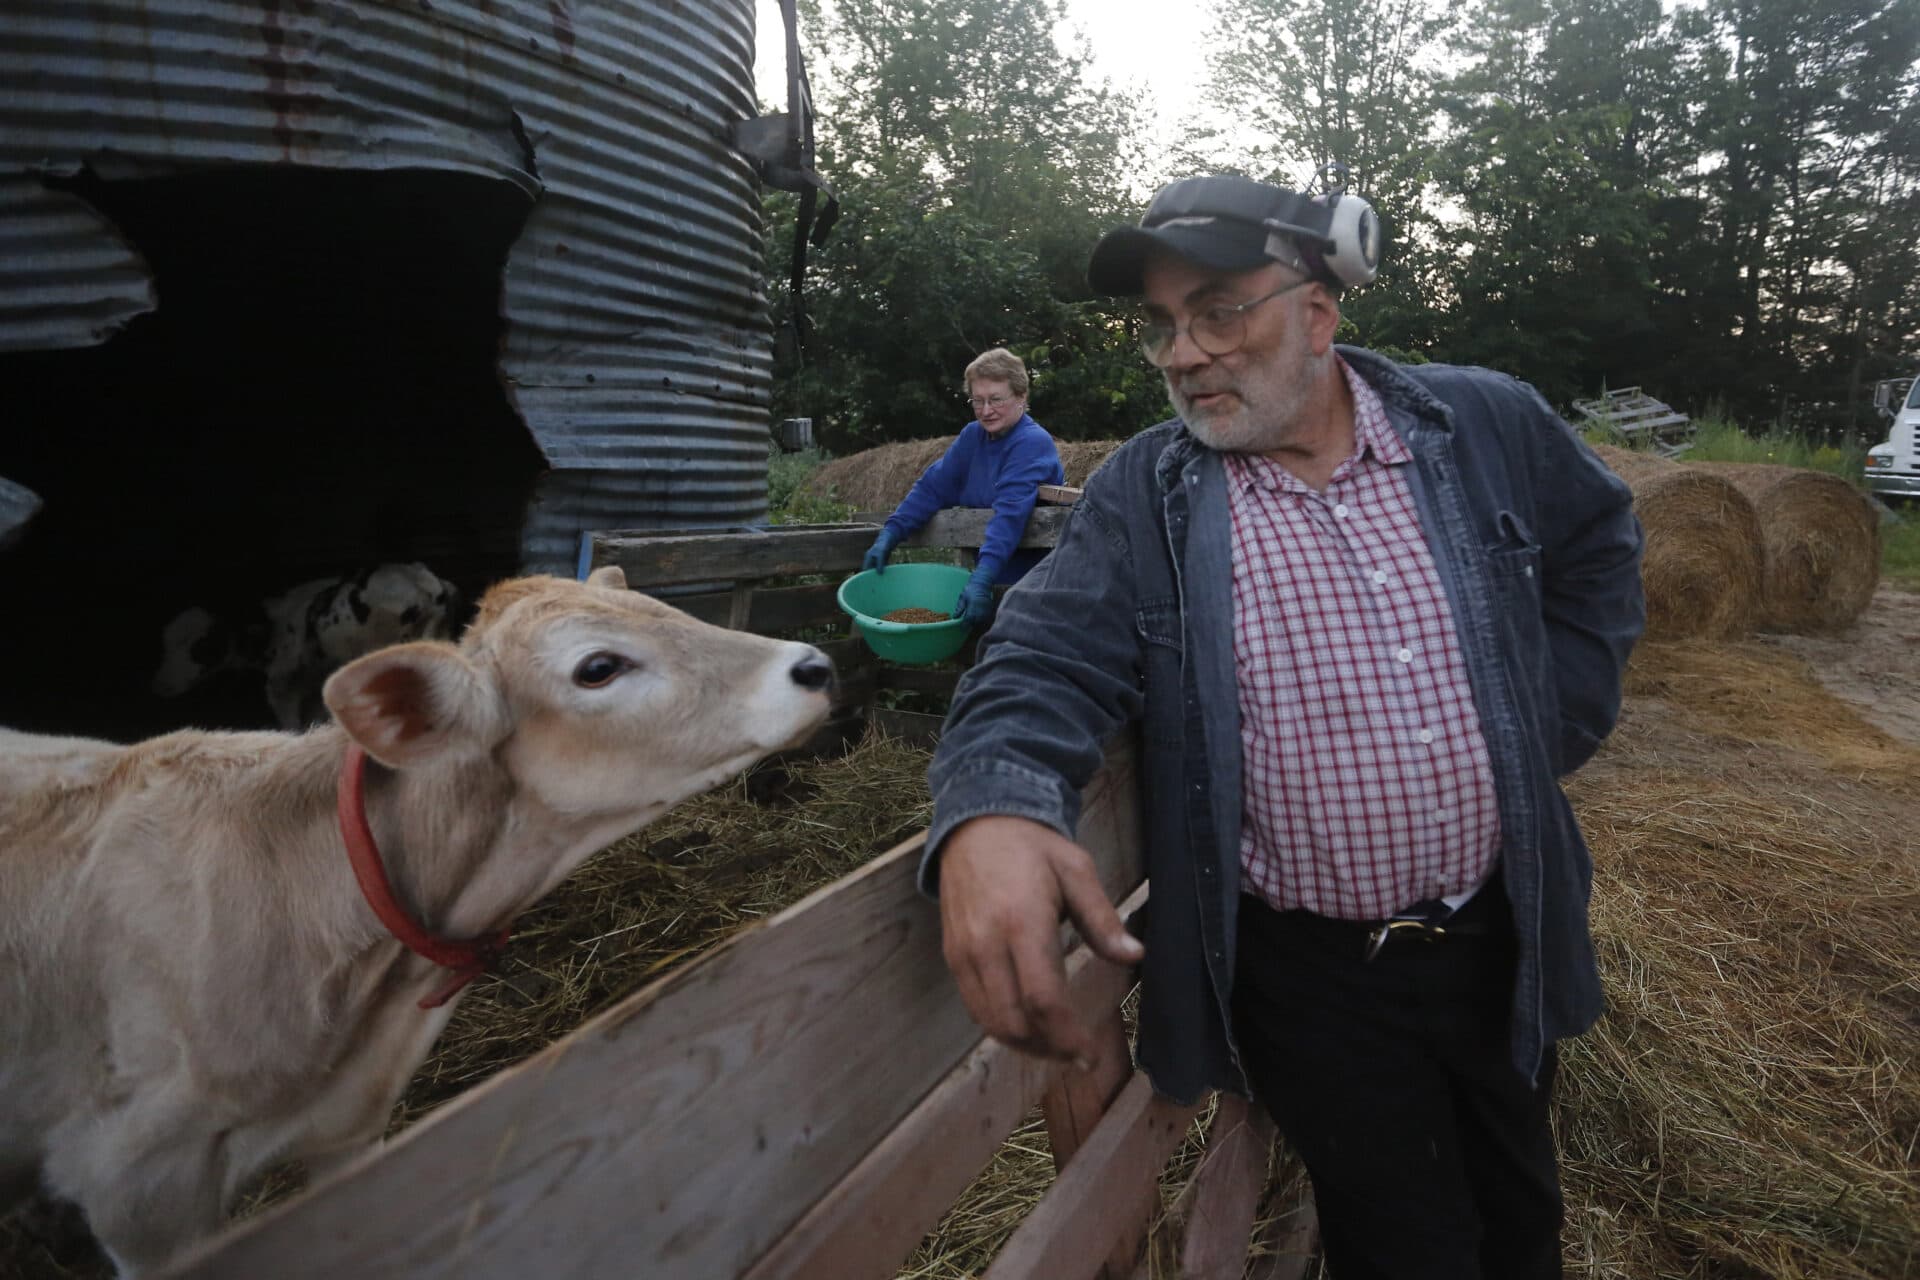 In this 2019 file photo, dairy farmers Fred and Laura Stone work on their farm in Arundel, Maine. The couple's farm has been forced to shut down after sludge spread on the land was linked to high levels of PFAS in the milk. (Robert F. Bukaty/AP)